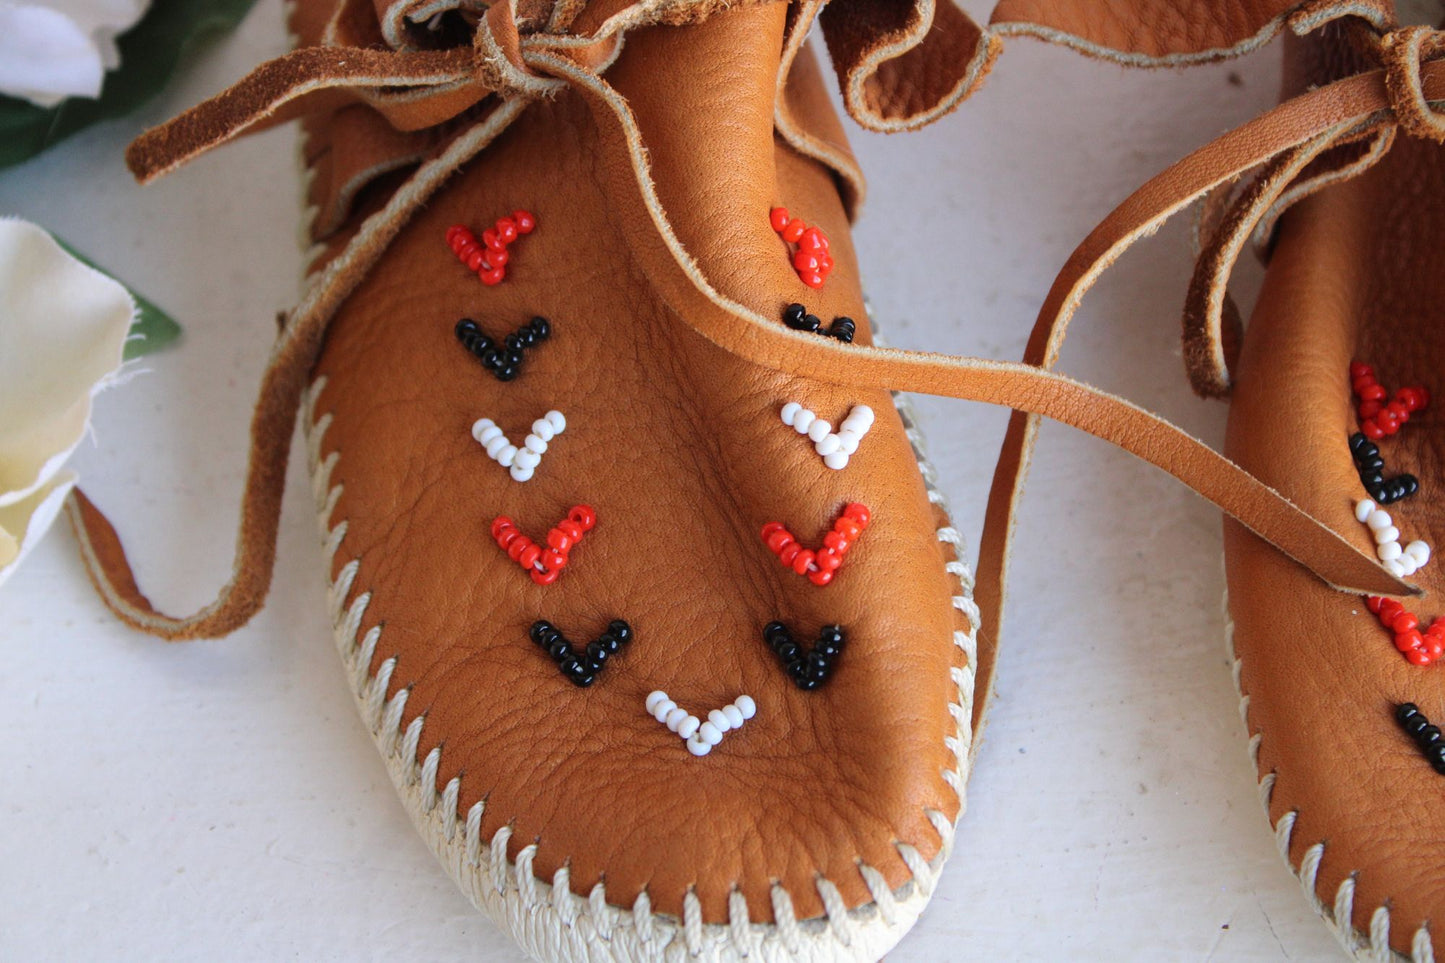 Vintage 1990's Moccasins, Tan Leather with Beading, Tru Moc with Swivel Action, Size 6.5